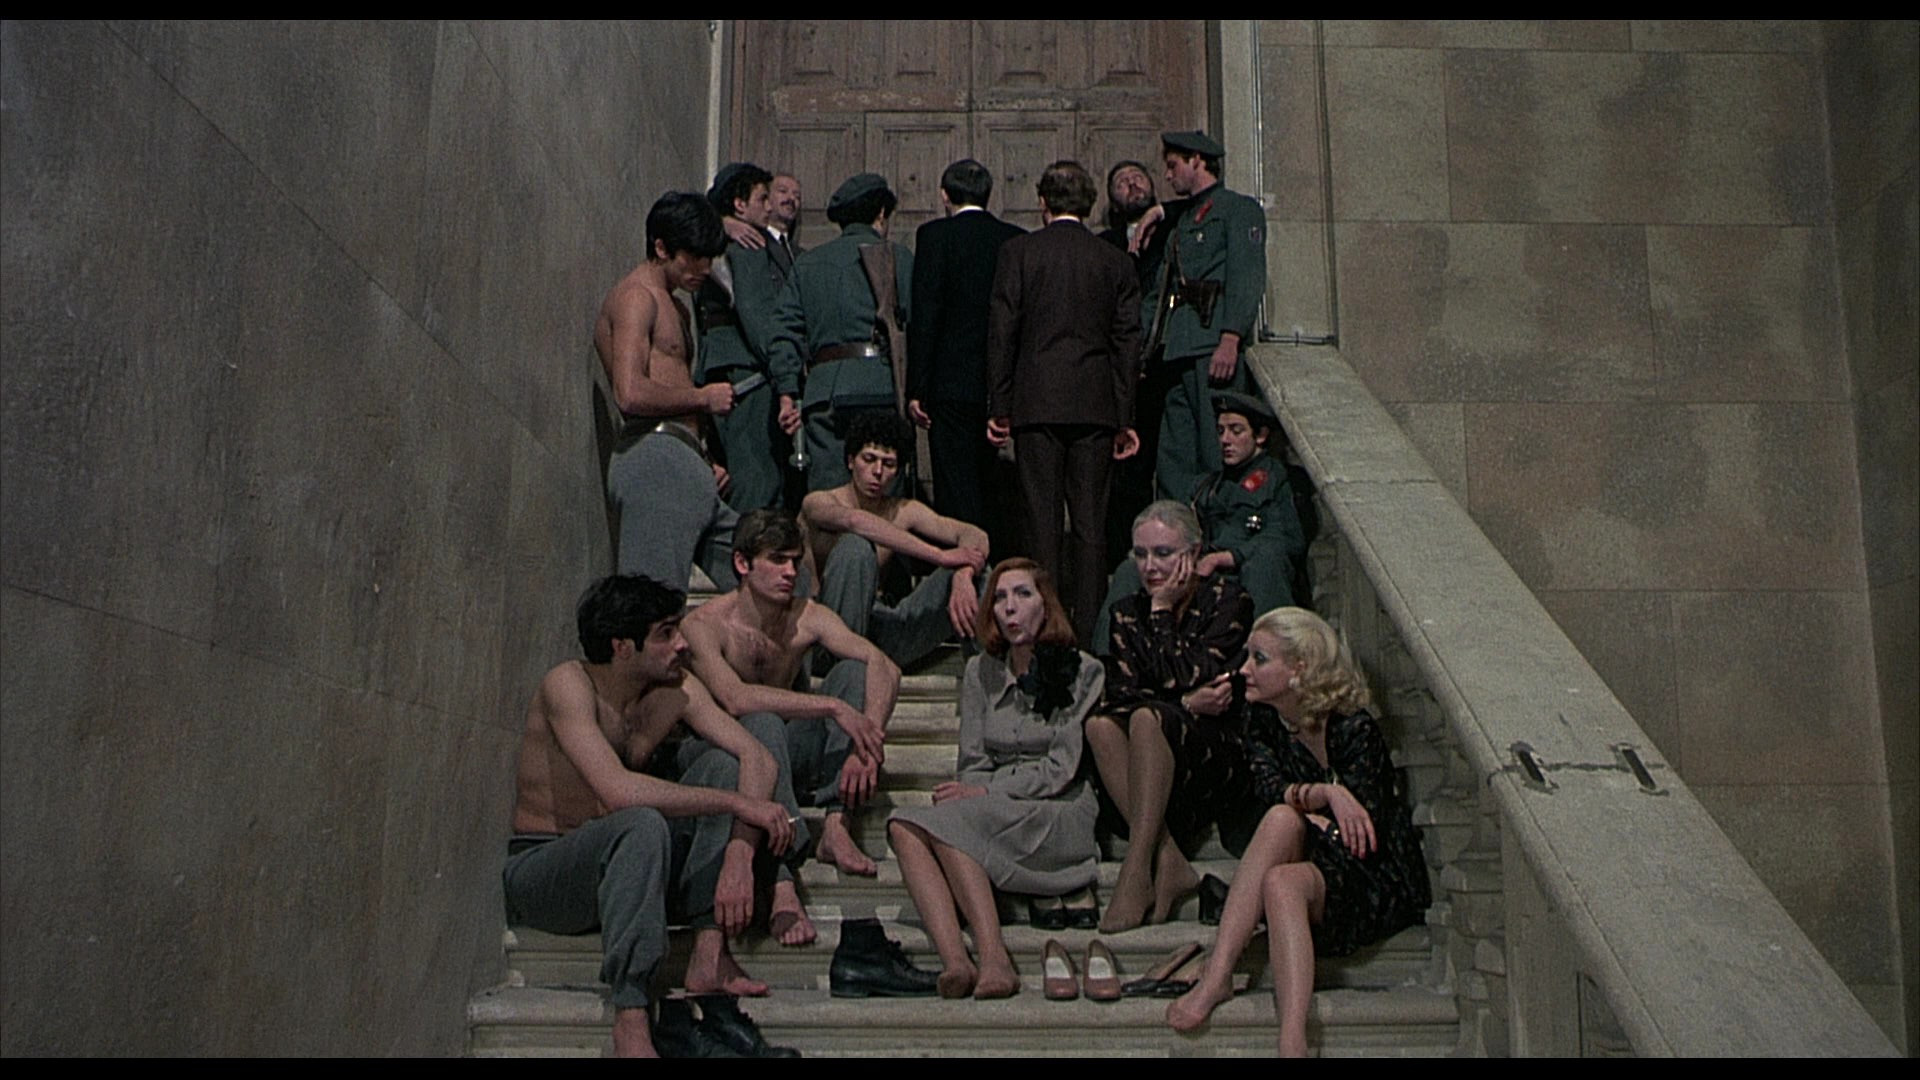 Salo, or the 120 days of Sodom (1976) Pier Paolo Pasolini